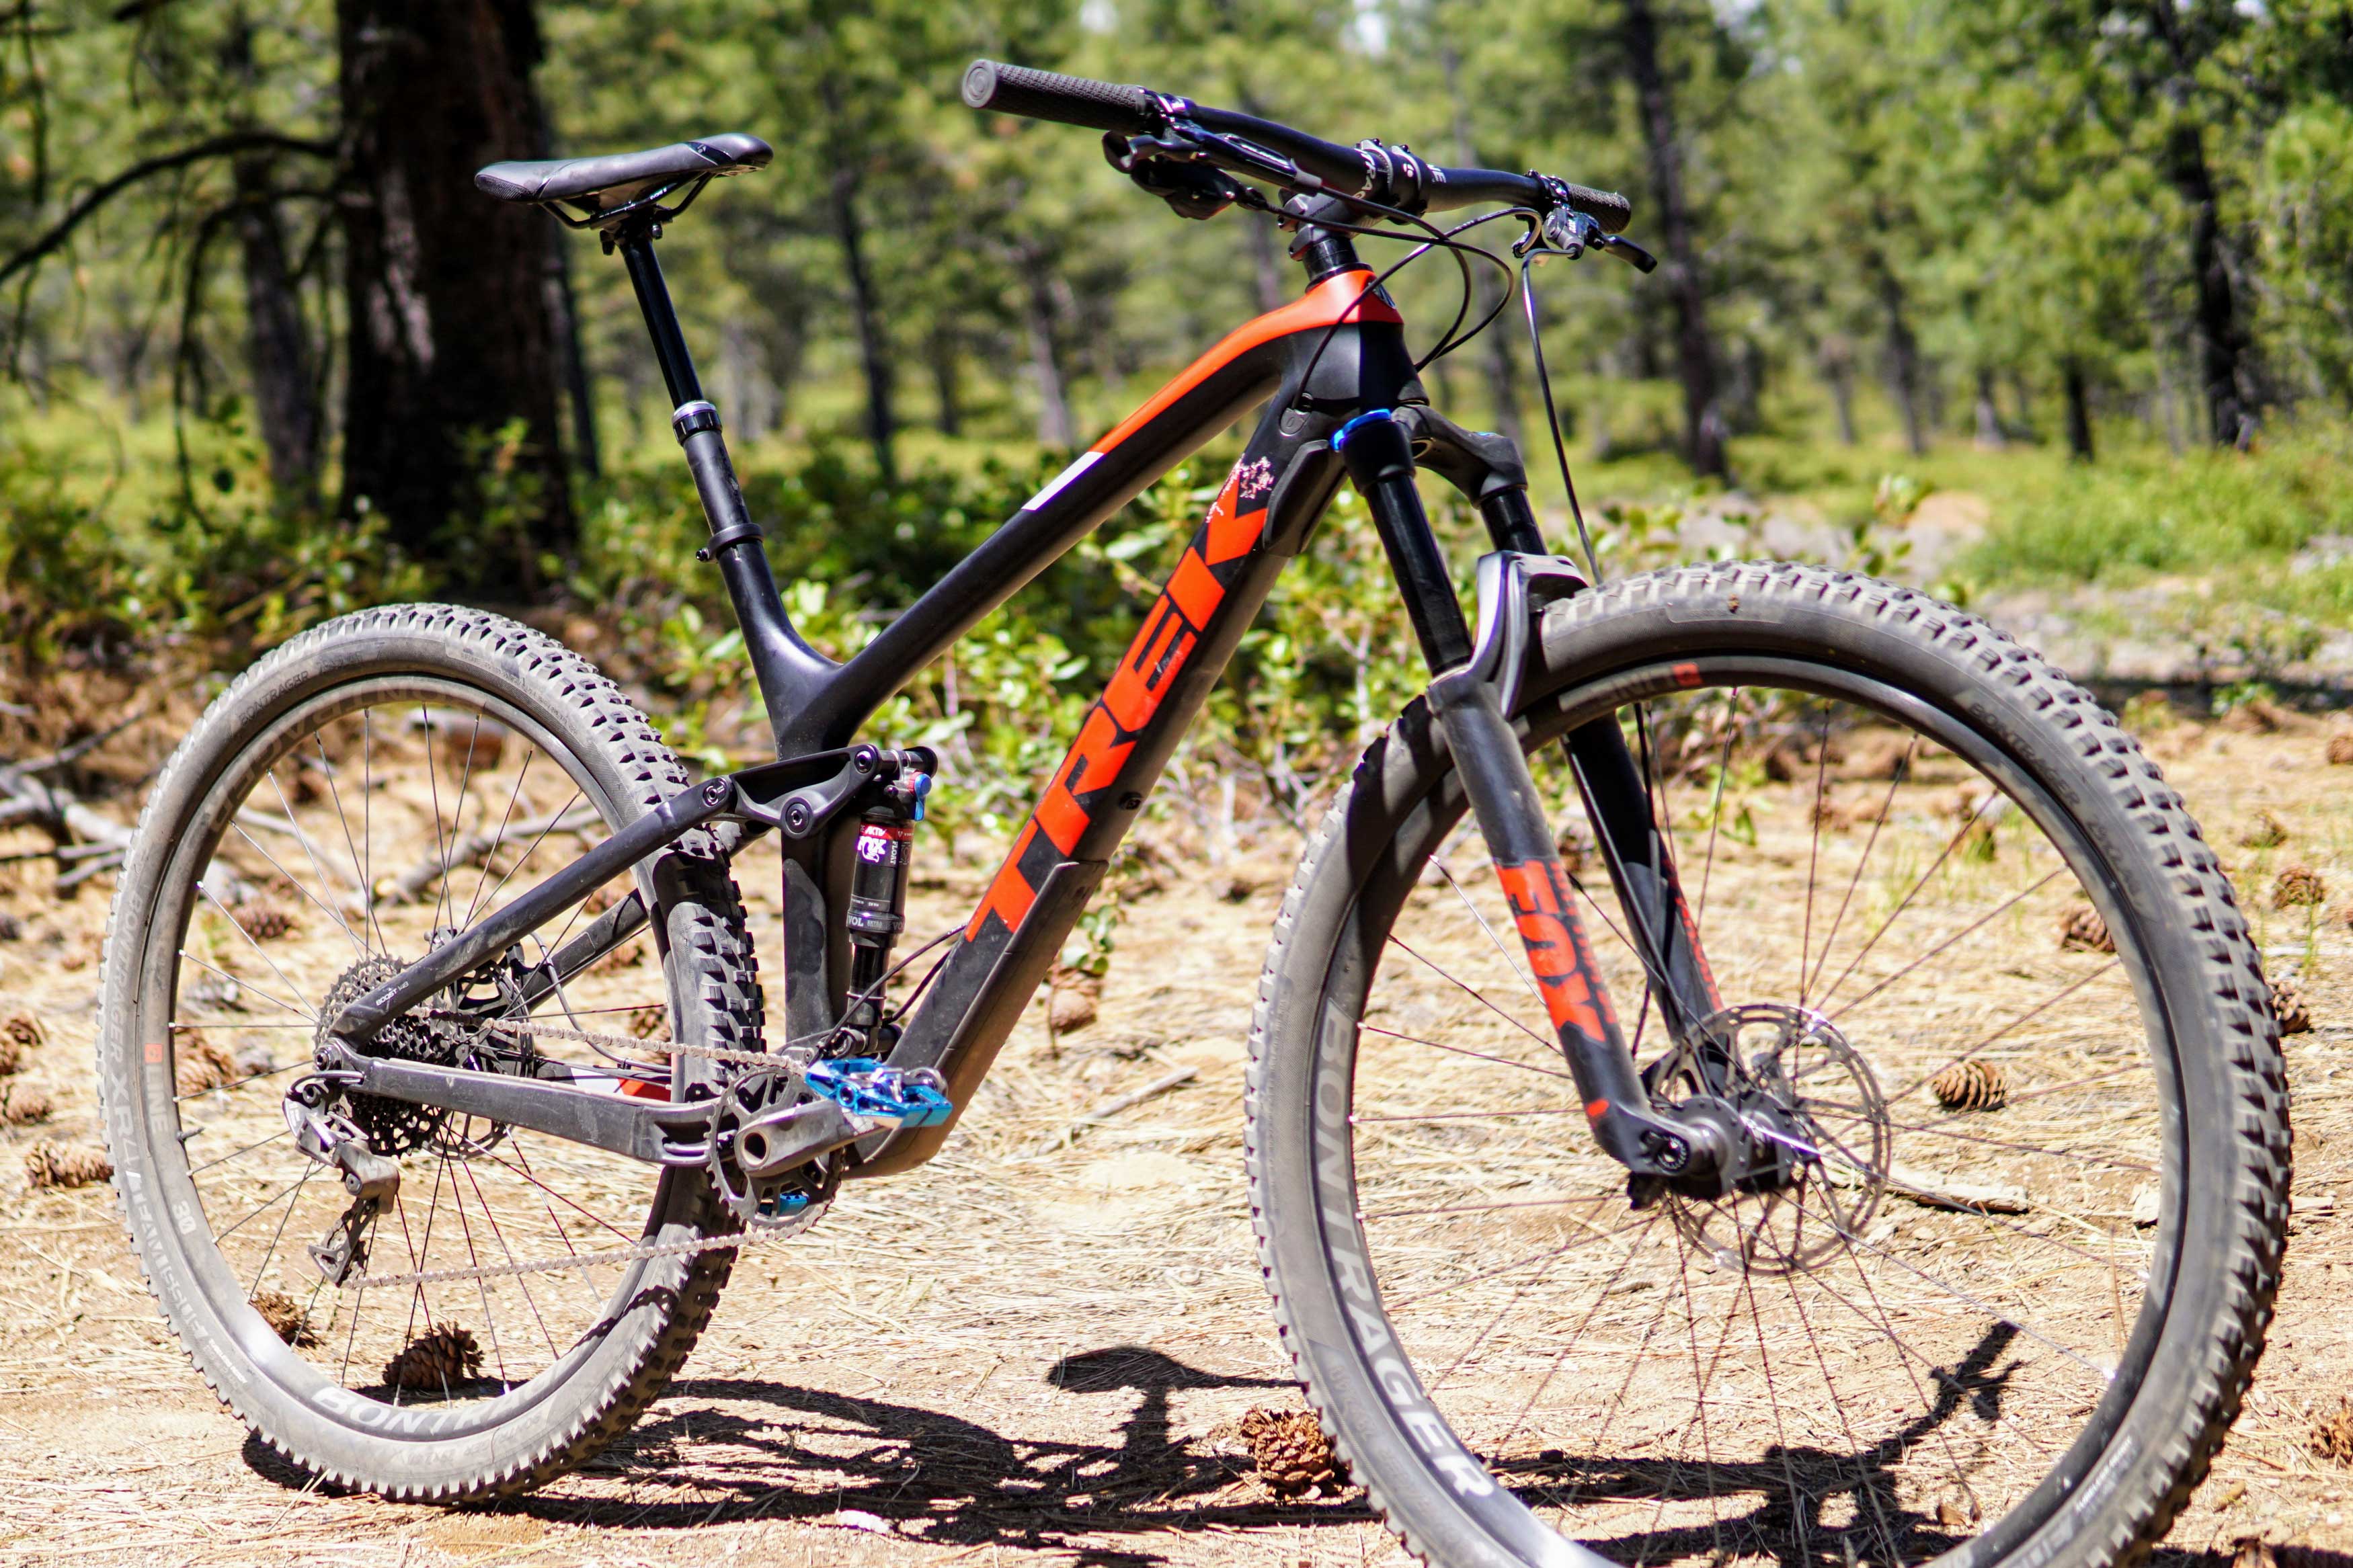 Ananiver overzien paperback The Fuel EX 9.7 is a standout highlight in our budget bike roundup